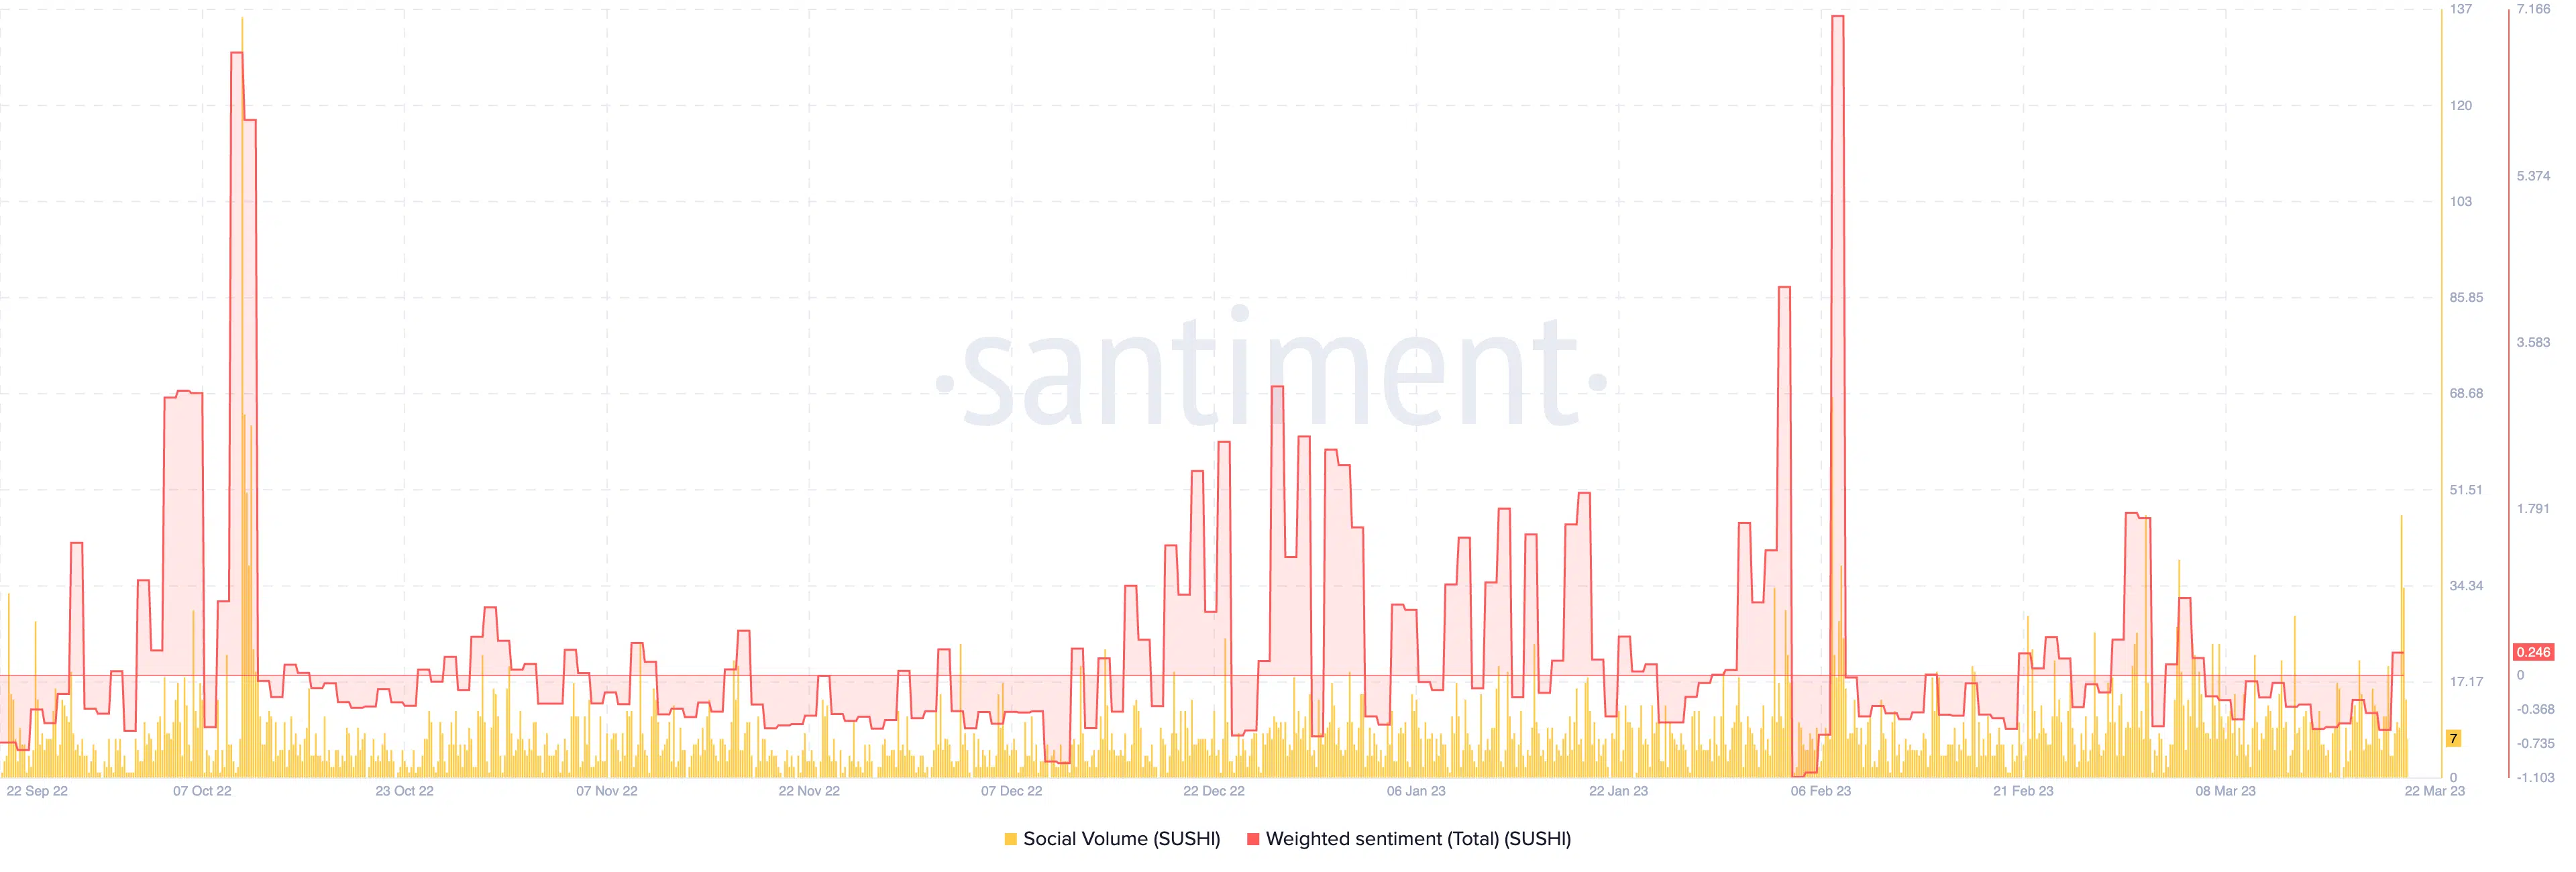 SushiSwap weighted sentiment and social volume